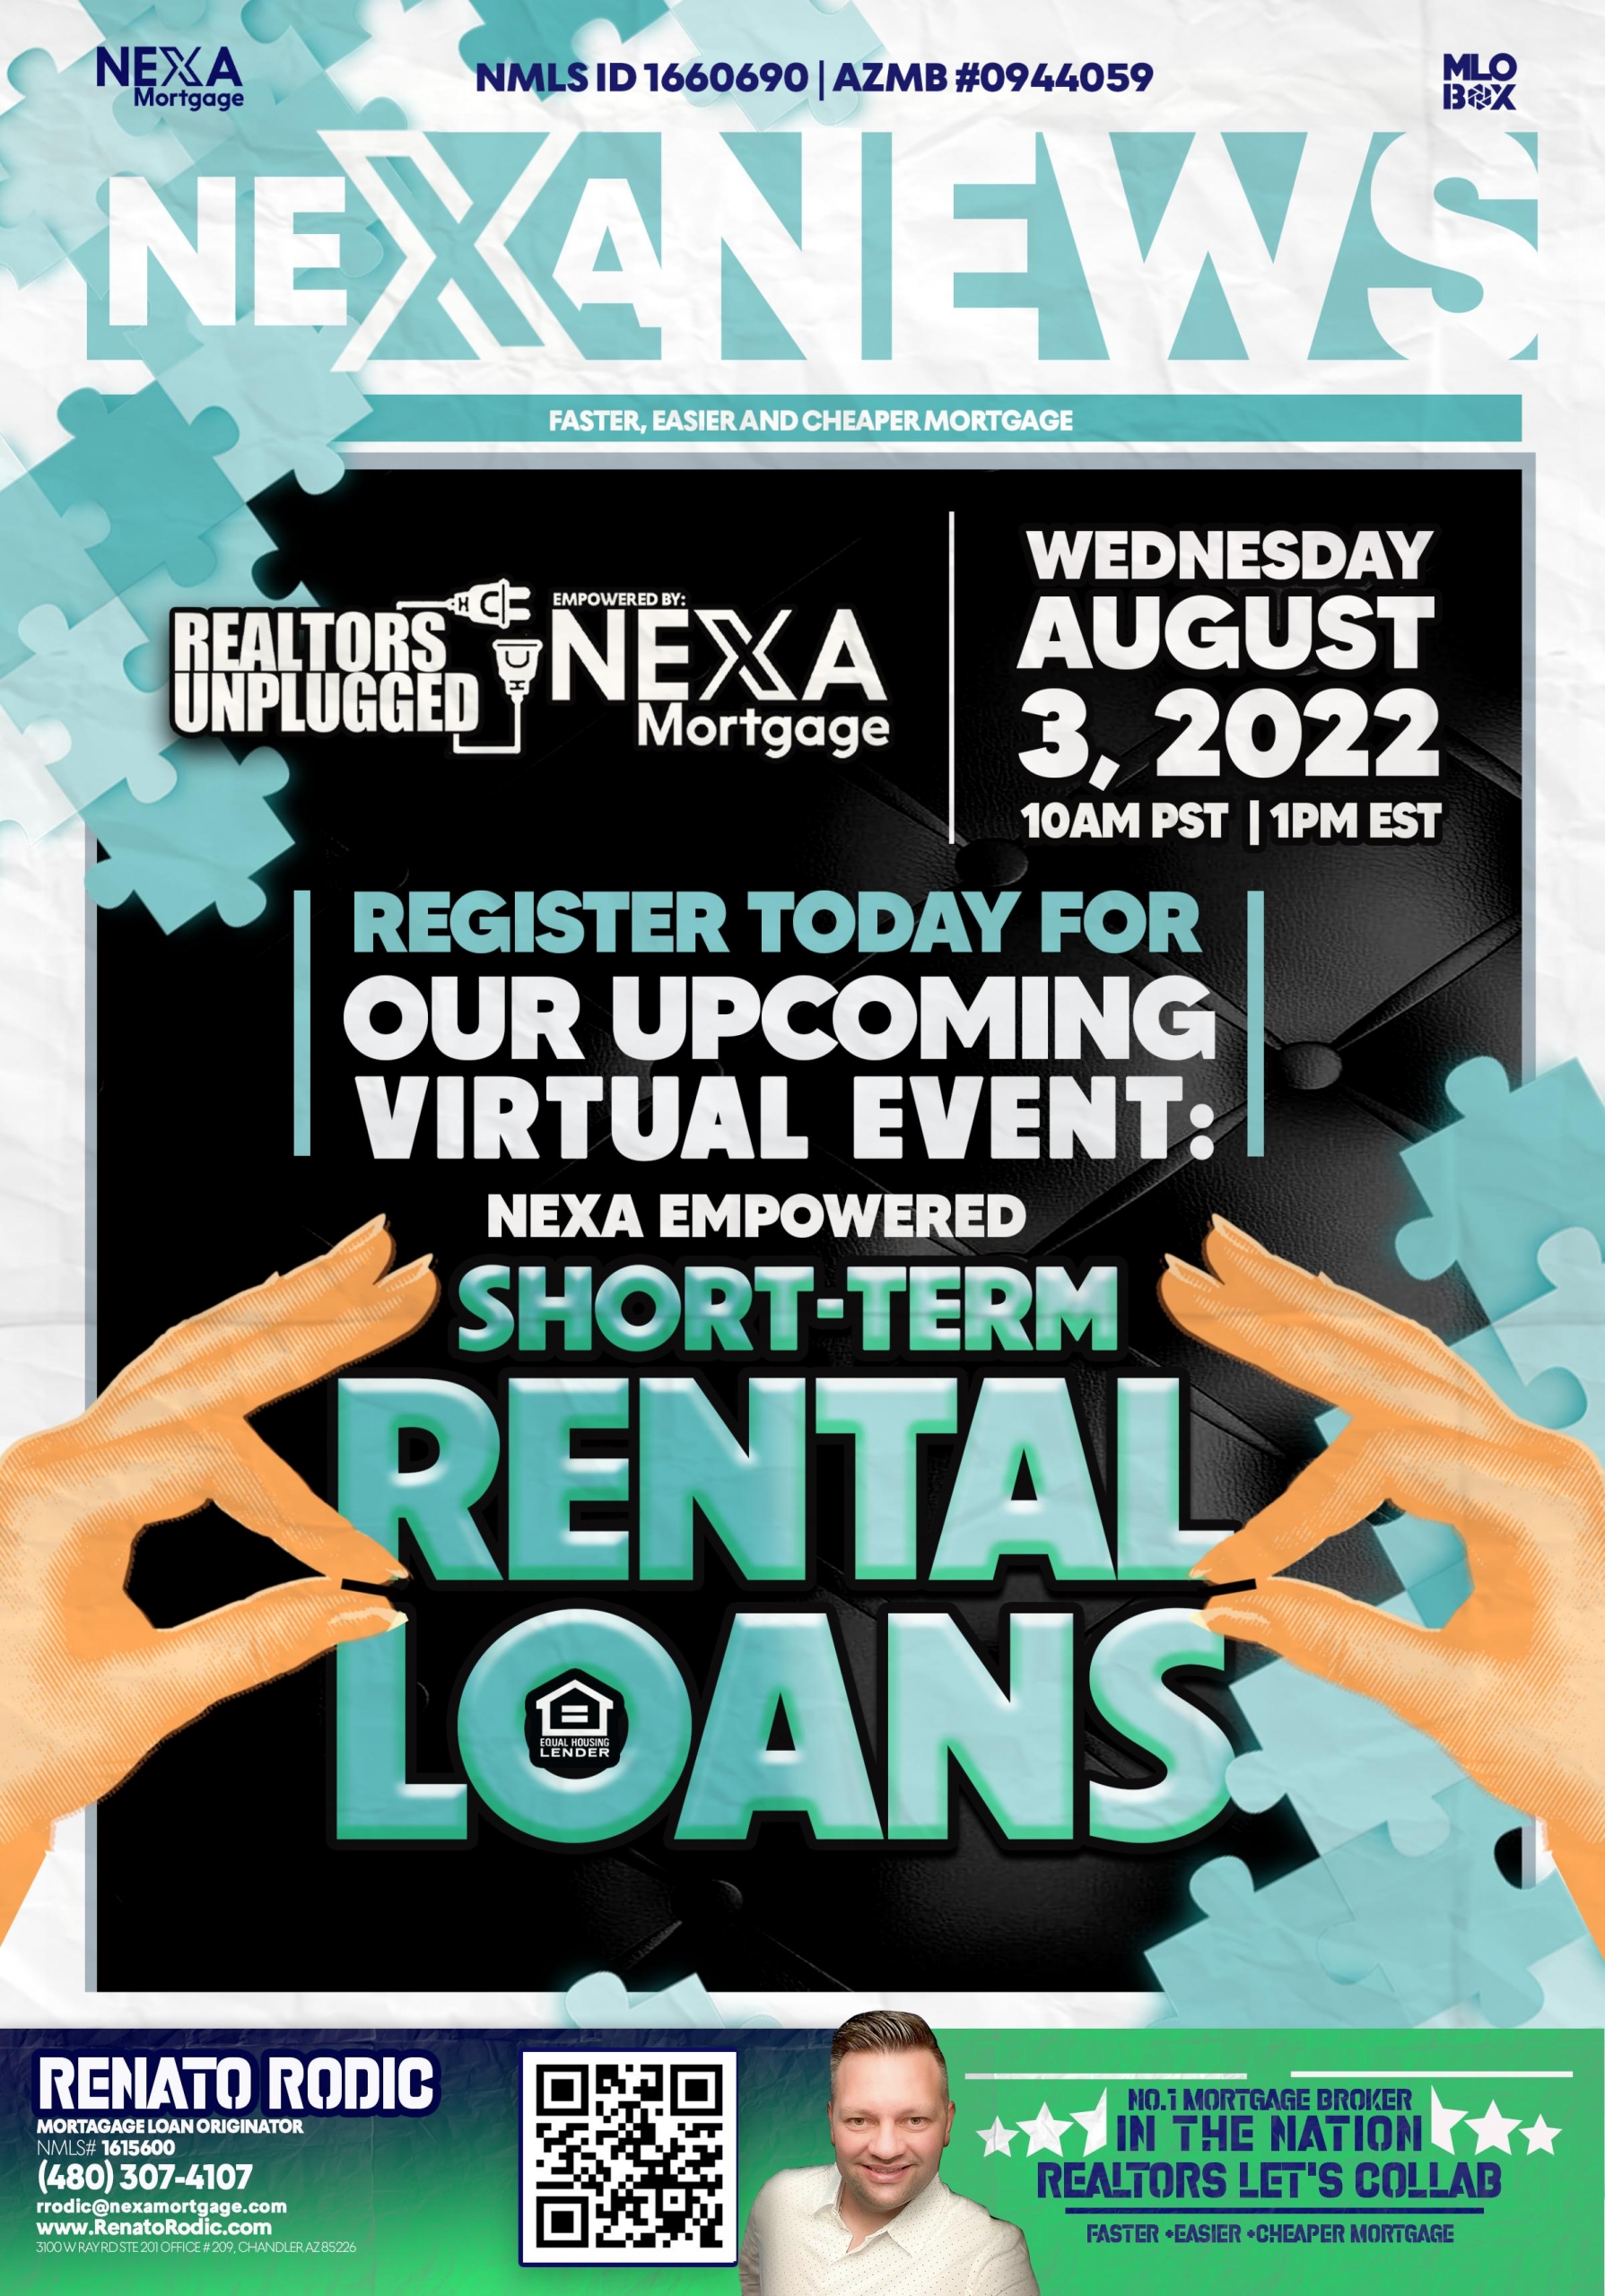 REALTOR FRIEND, COME AND LEARN ABOUT SHORT TERM RENTAL LOANS